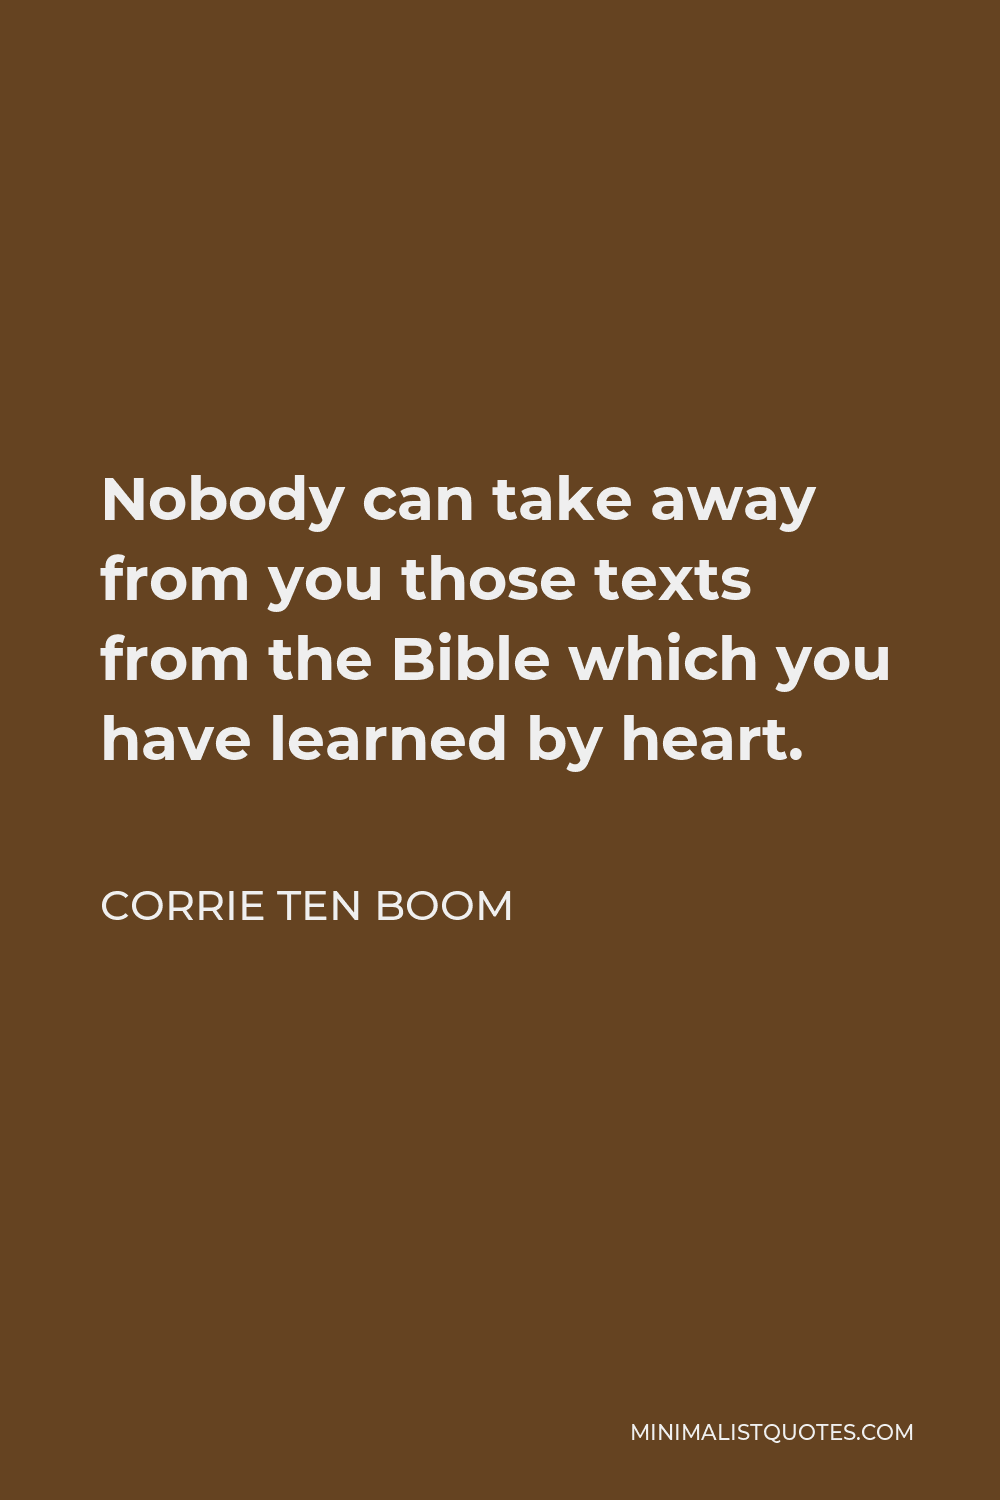 Corrie ten Boom Quote - Nobody can take away from you those texts from the Bible which you have learned by heart.